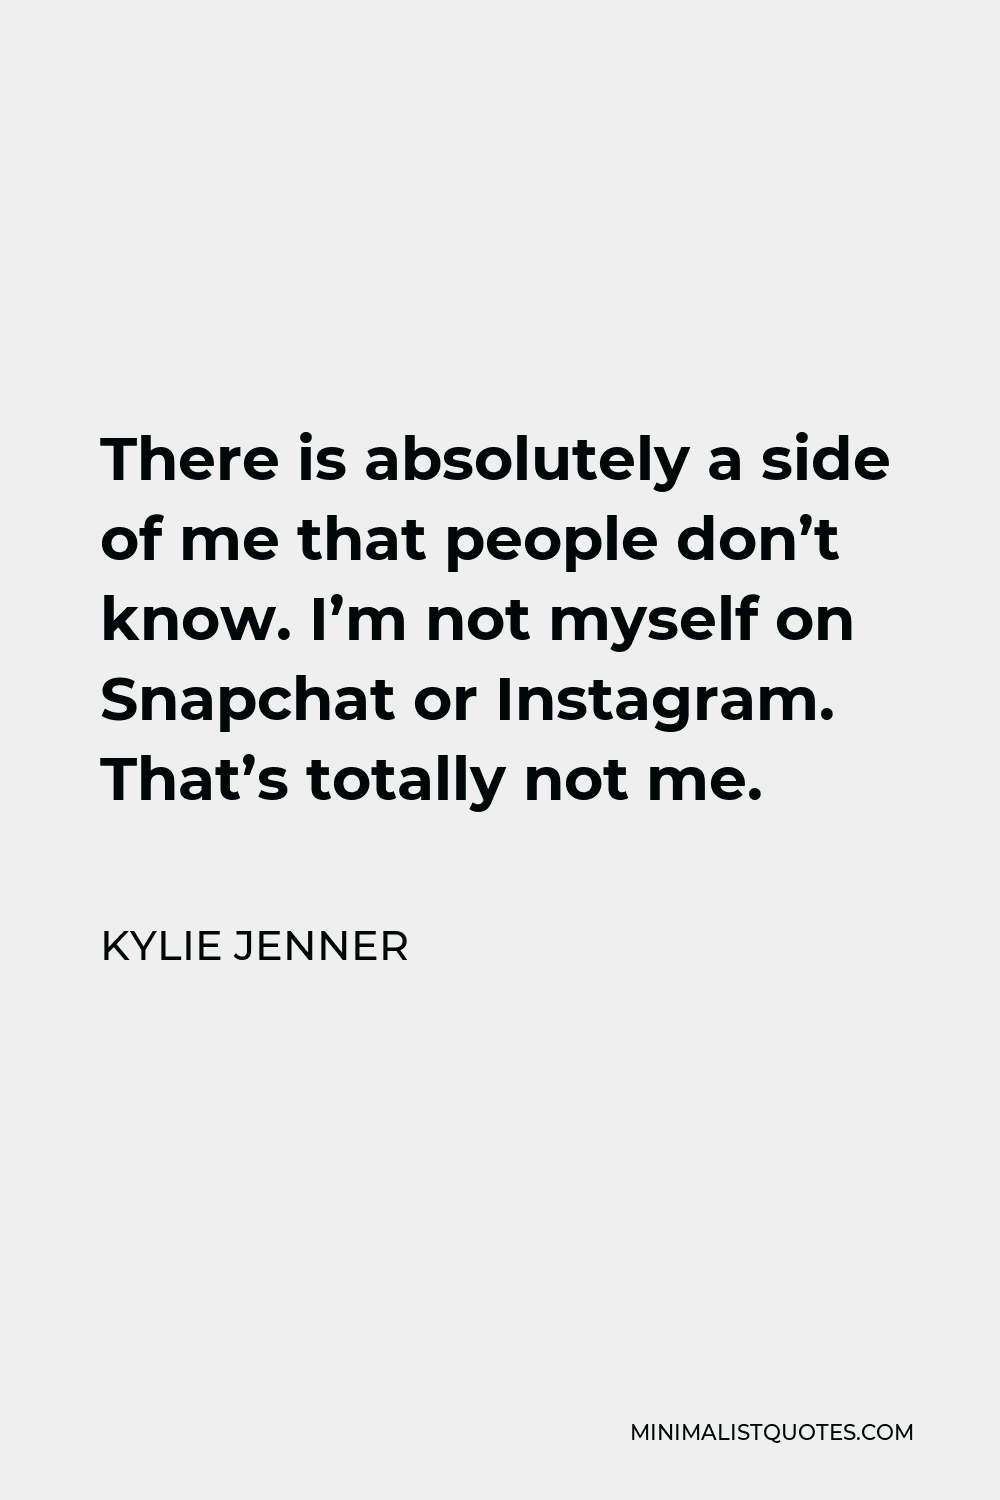 Kylie Jenner Quote - There is absolutely a side of me that people don’t know. I’m not myself on Snapchat or Instagram. That’s totally not me.